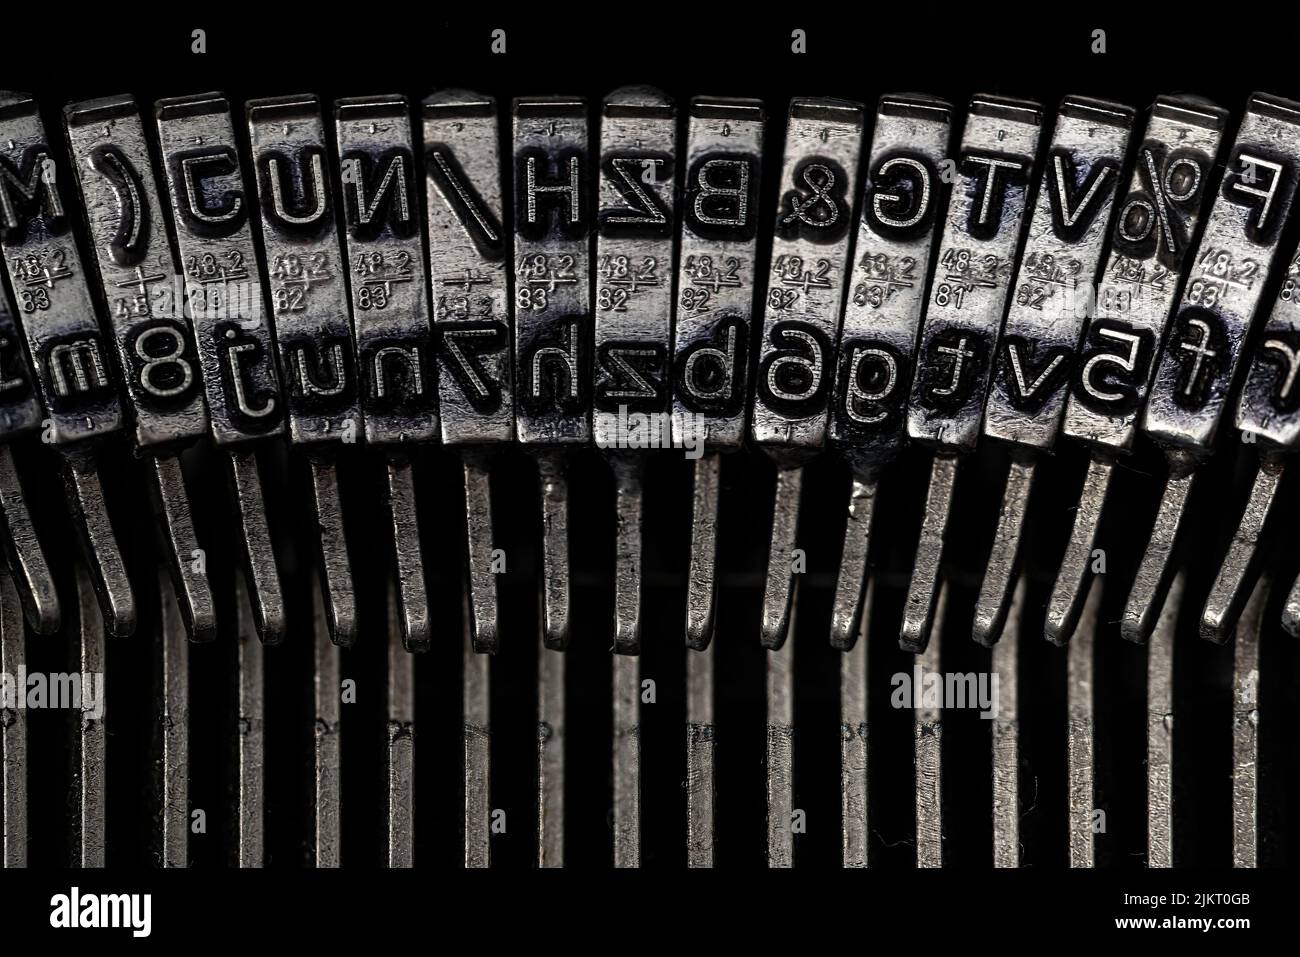 close-up view of typebars of vintage mechanical typewriter with letters on striking heads Stock Photo